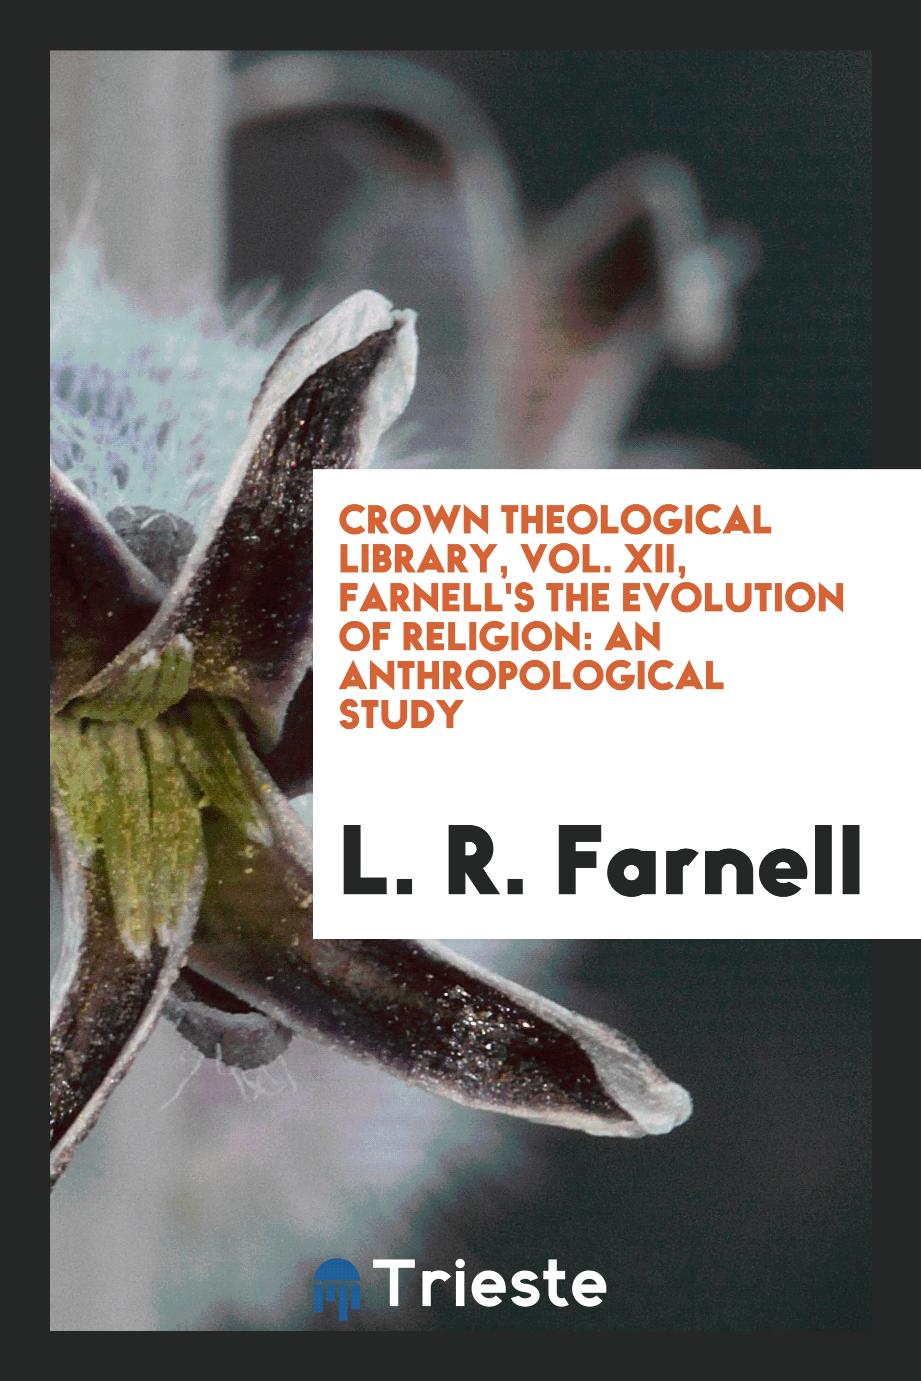 Crown theological library, Vol. XII, Farnell's the evolution of religion: an anthropological study